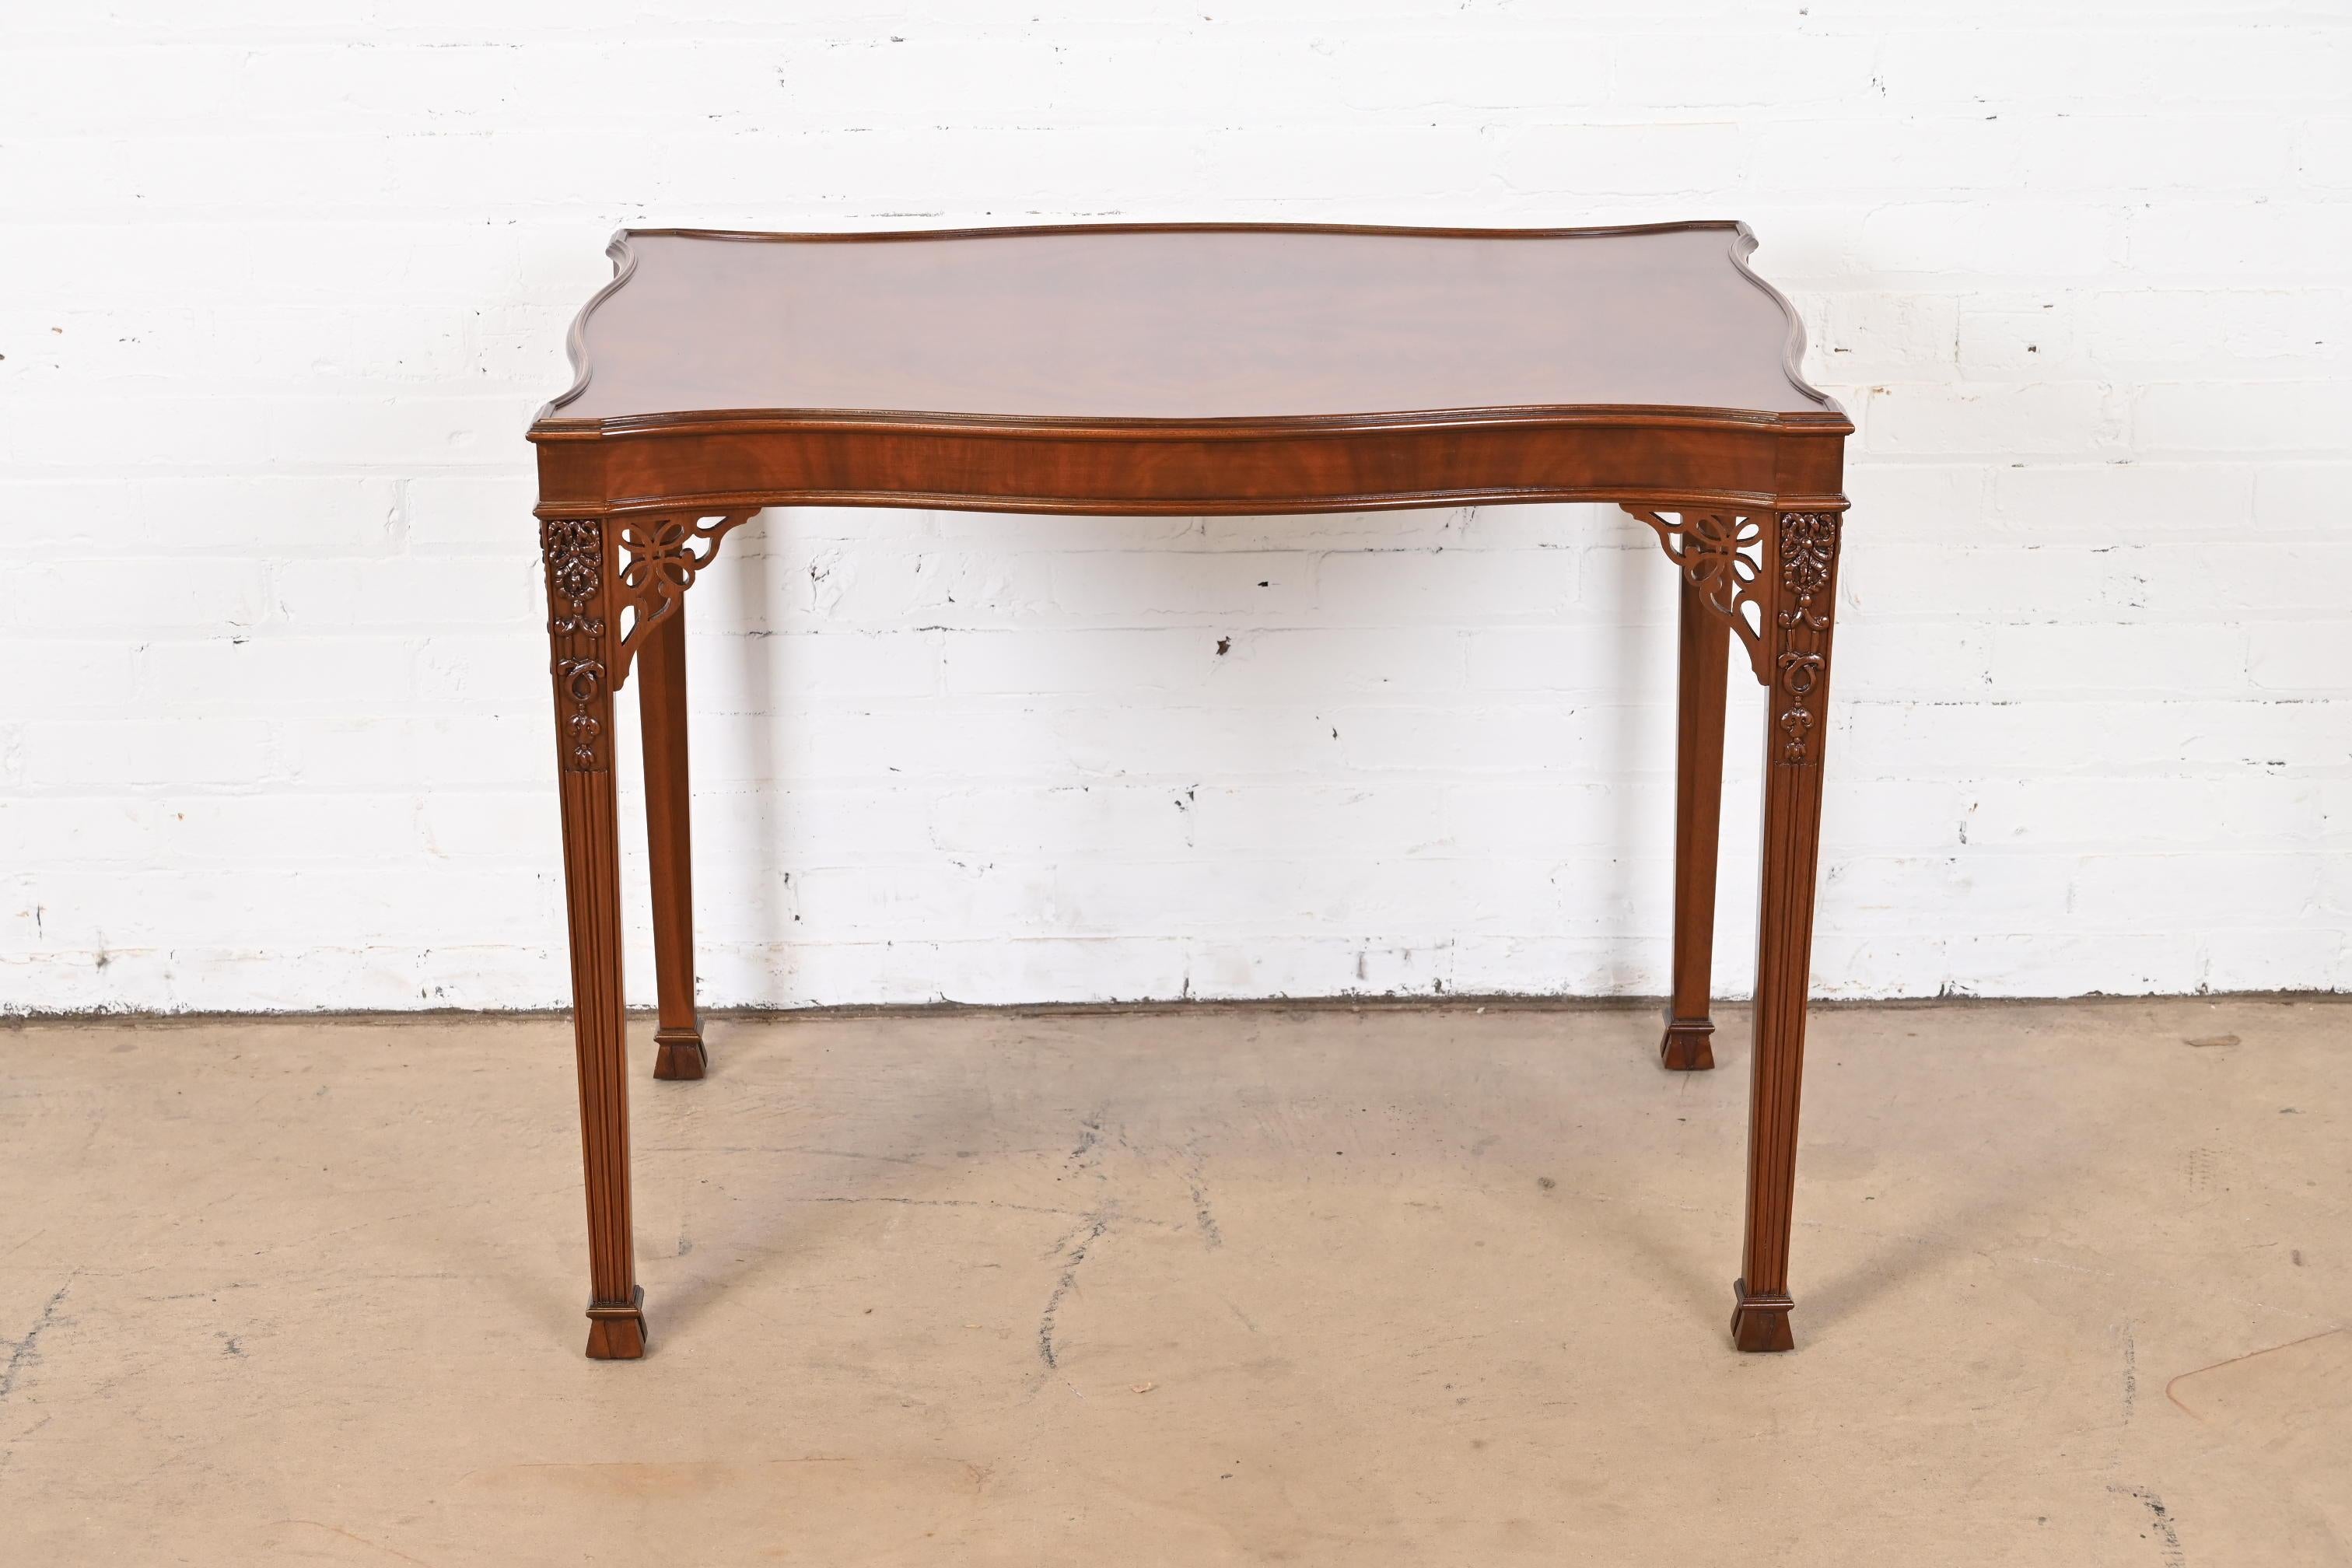 An exceptional Chippendale style carved mahogany occasional side table or tea table

By Baker Furniture, 